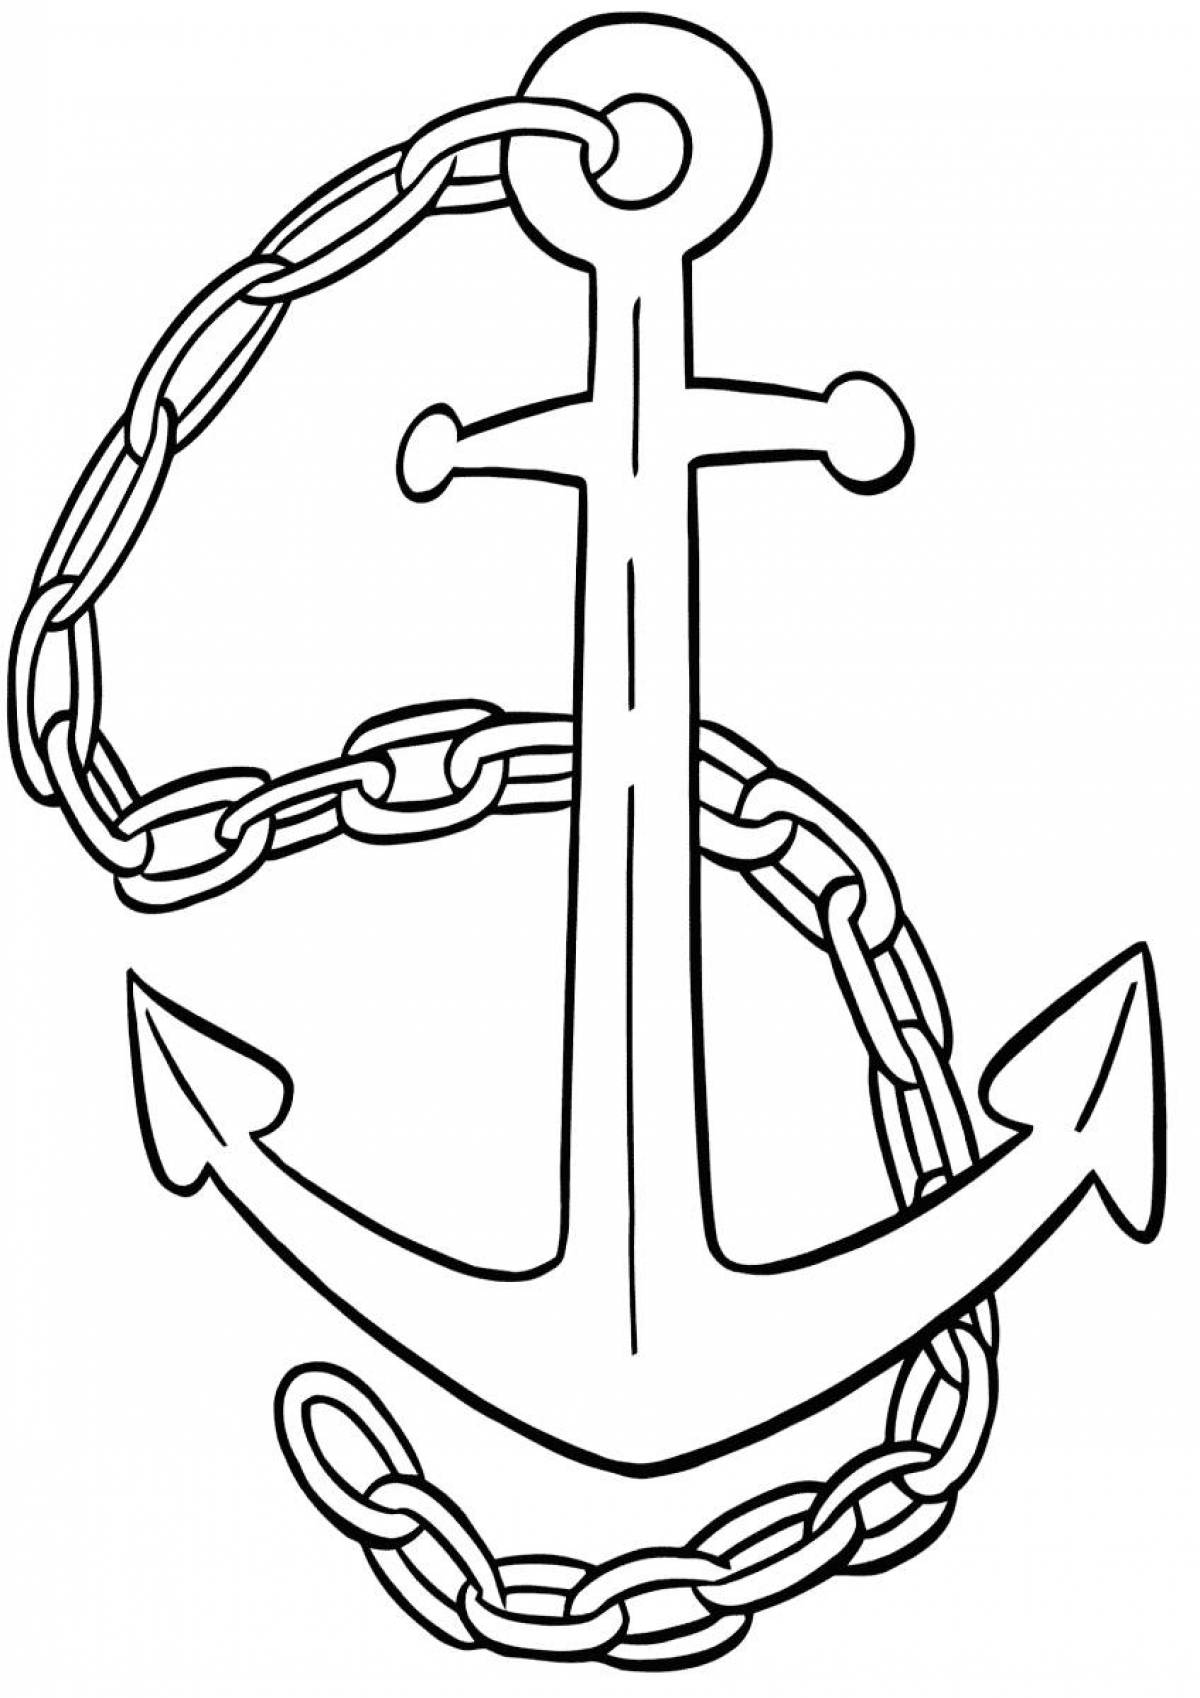 Anchor on the chain